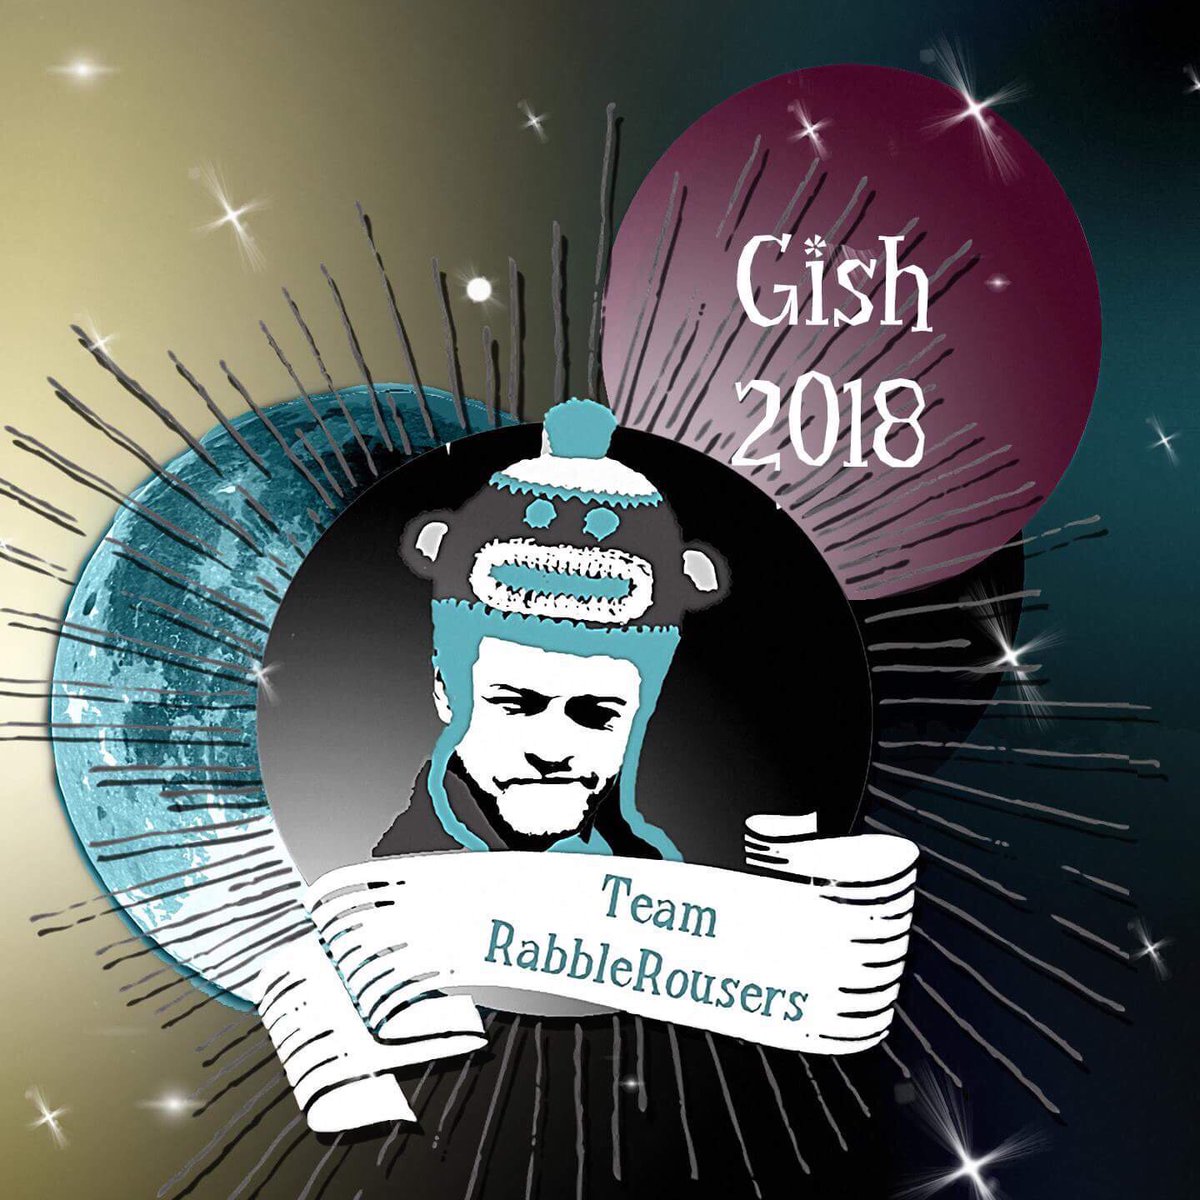 Looking for an “In it to win it” #Gish team? Team RabbleRousers has ONE more  open spot and we would love to have you! #RabbleRousers2018 #RebelsWithACause #JoinUs